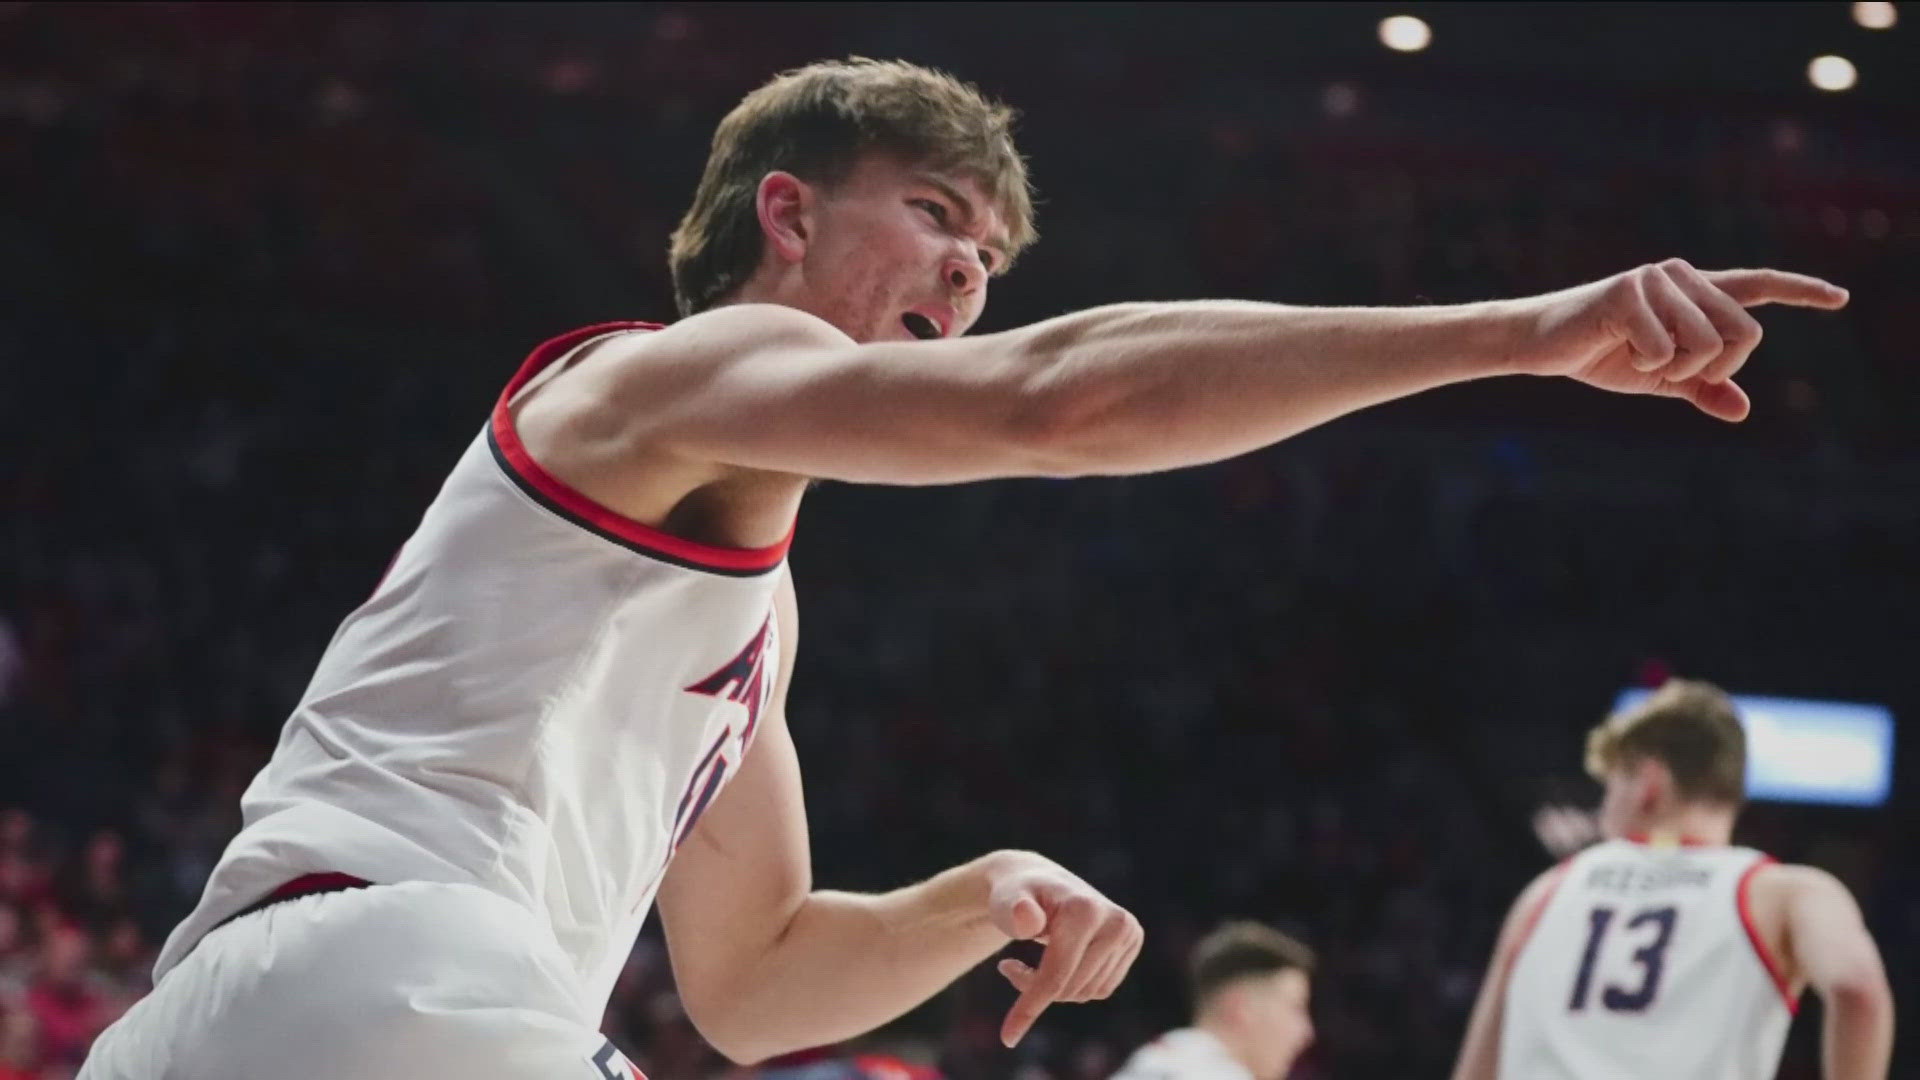 The 7-foot center held offers from Gonzaga, Kansas, North Carolina and others in high school as a two-time Gatorade Arizona Player of the Year.